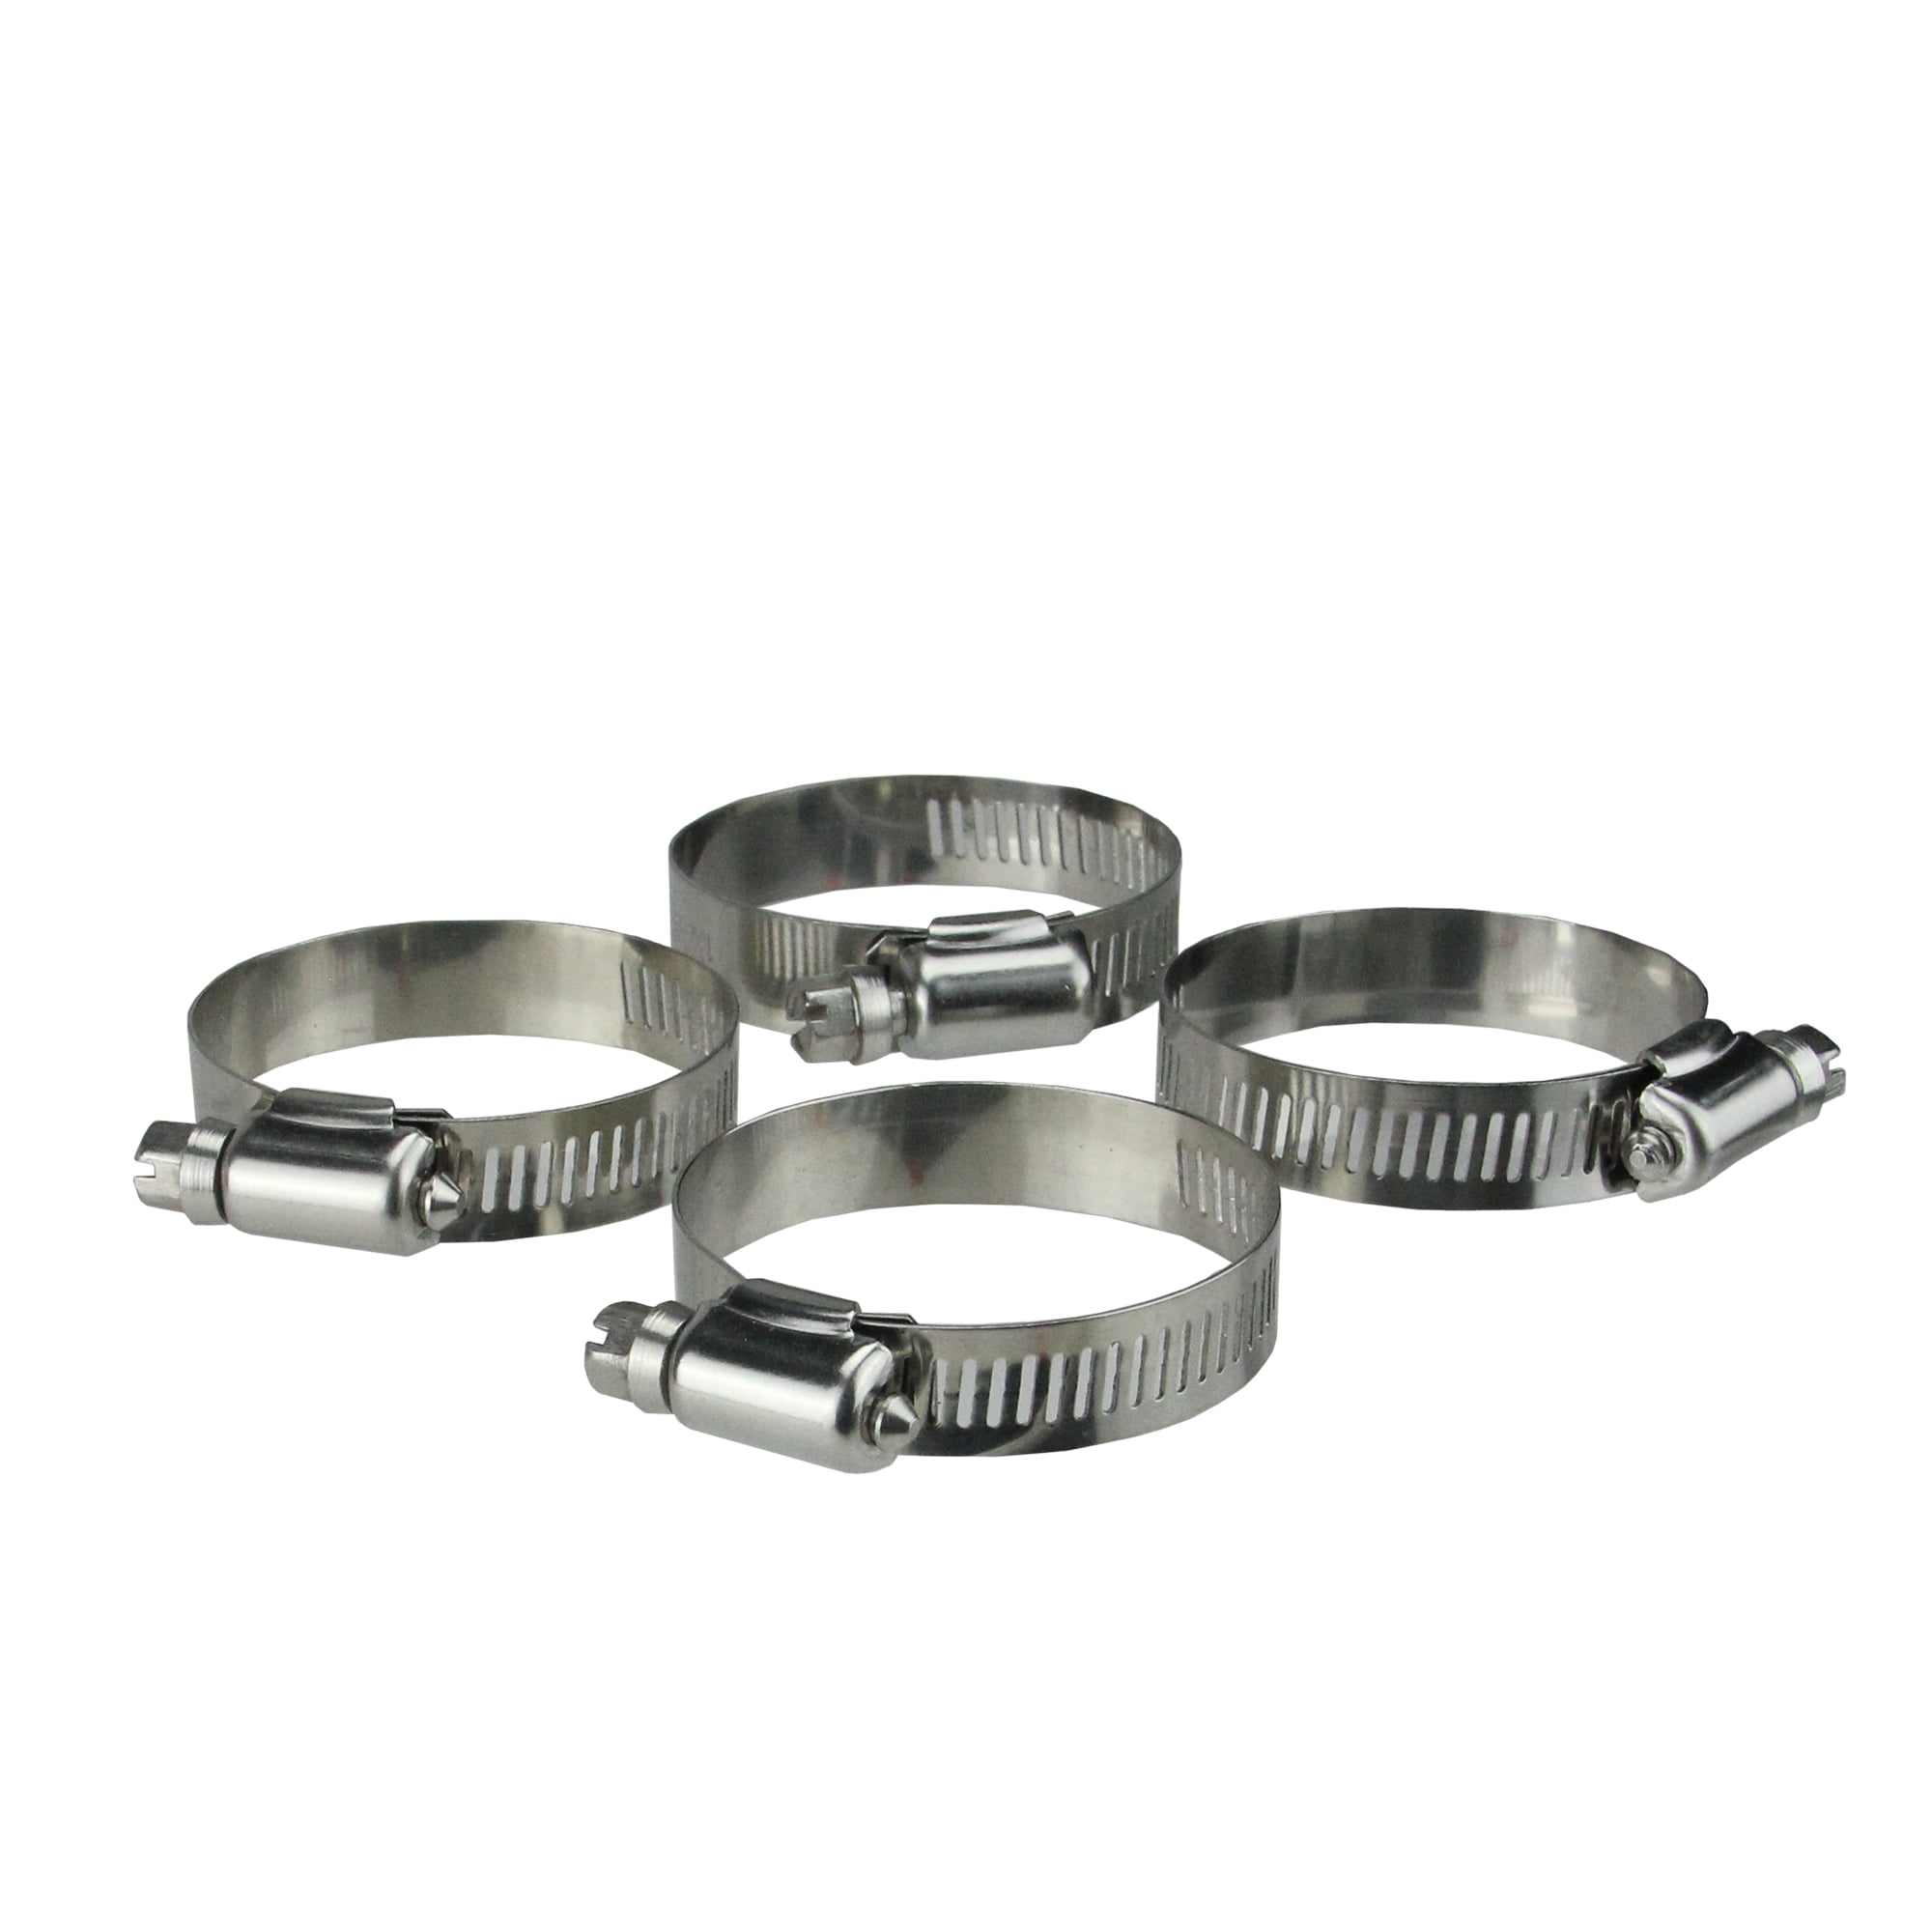 NEW 10 Piece 10x 50mm to 70mm Stainless Steel Hose Clamps 